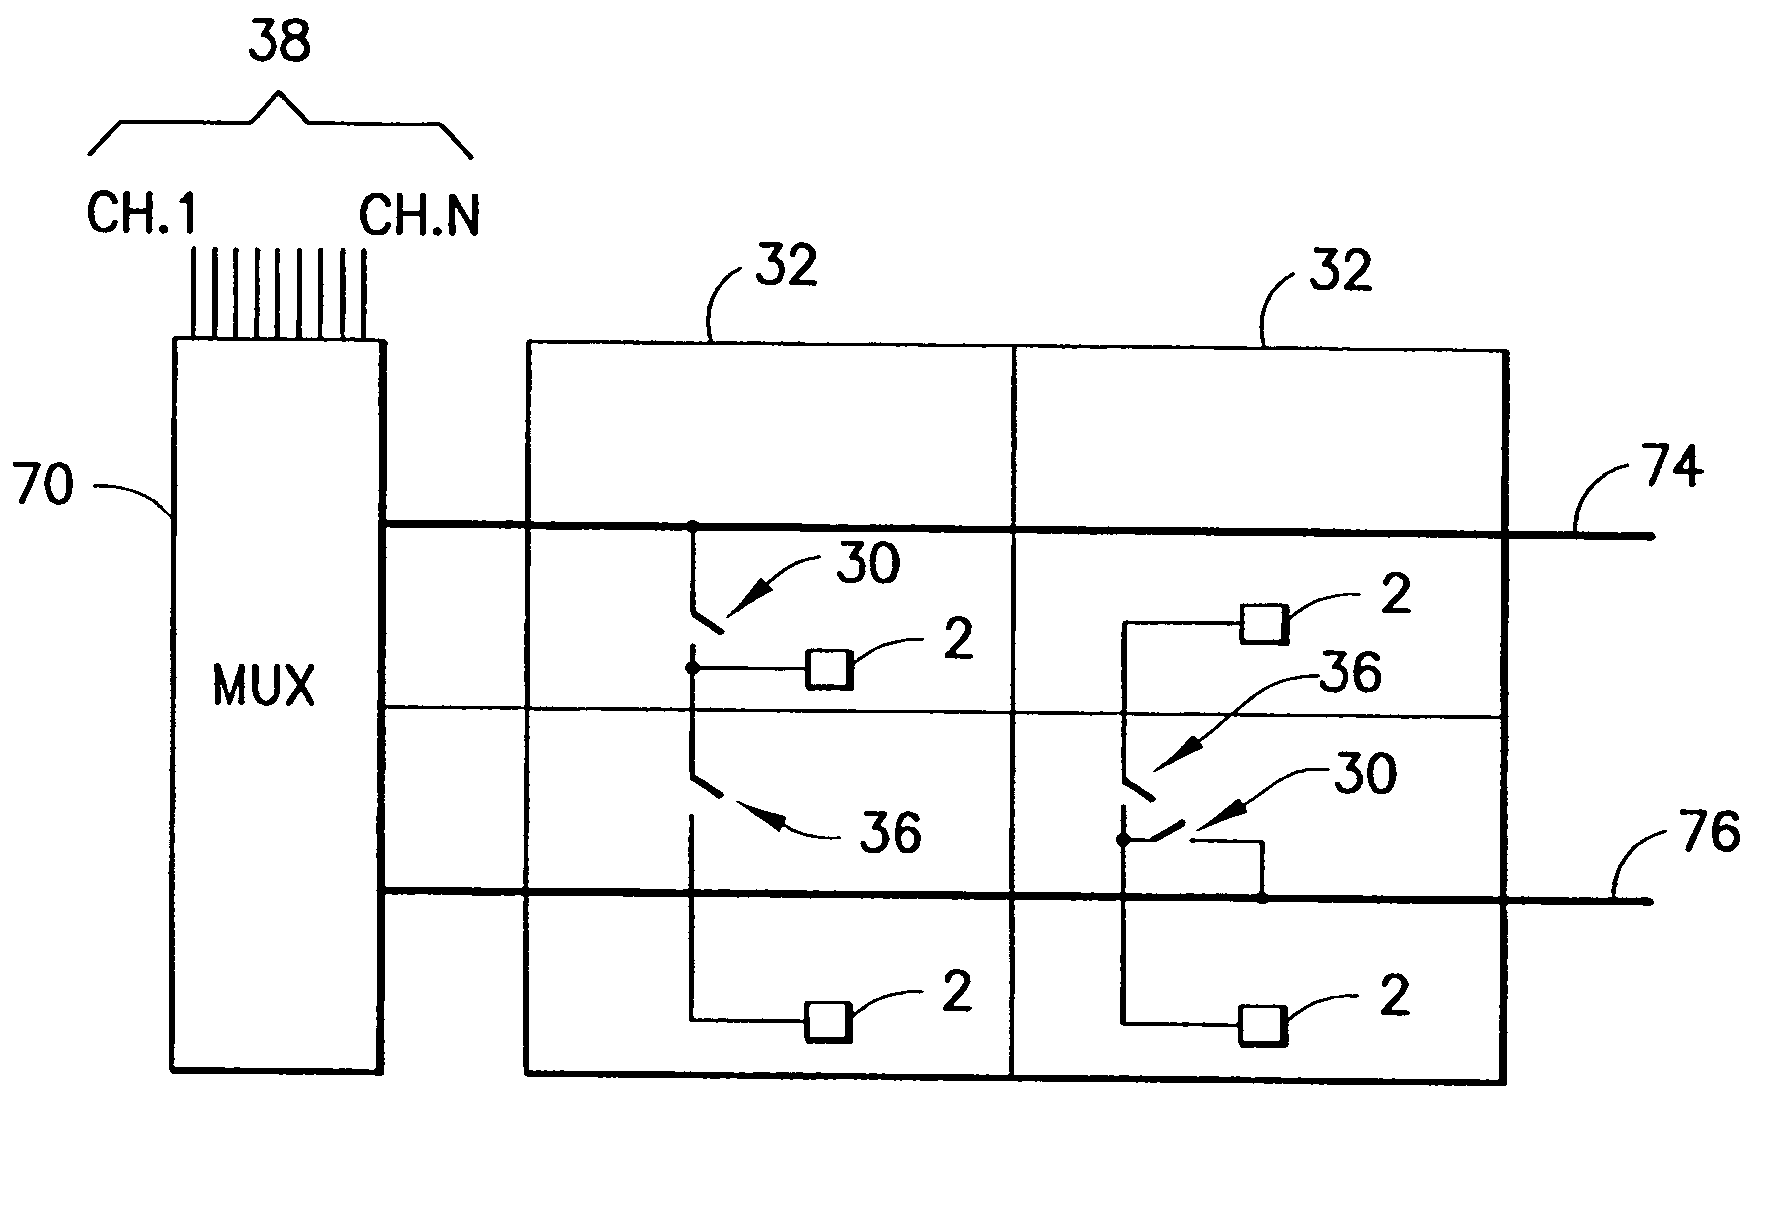 Switching circuitry for reconfigurable arrays of sensor elements